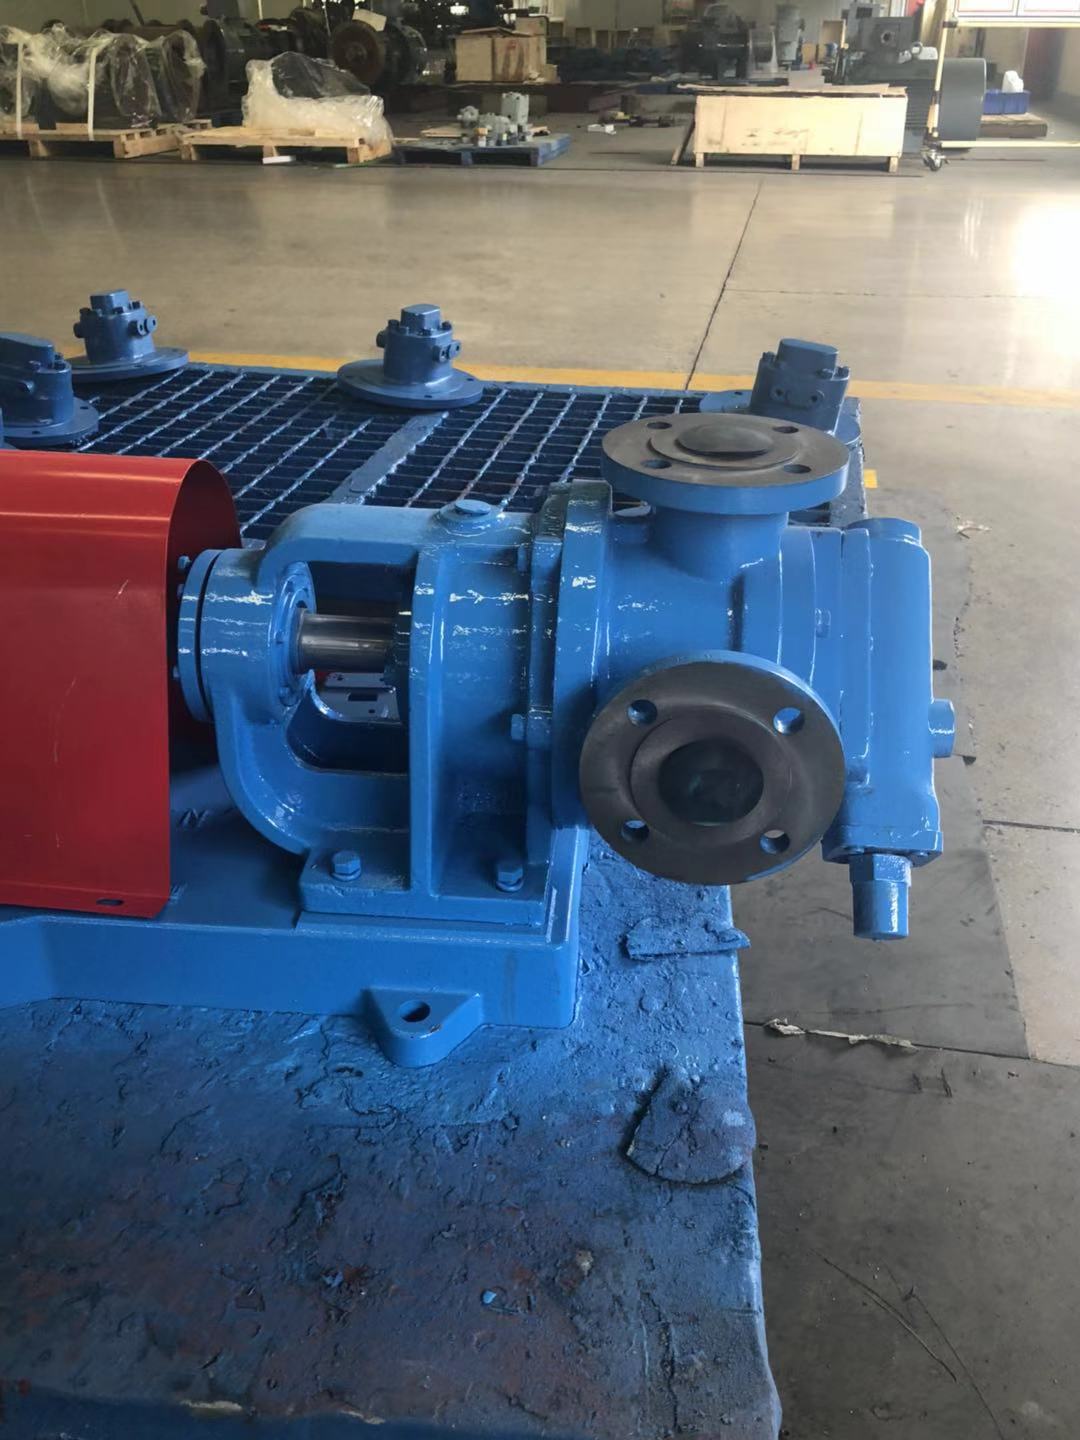 1.5 Inch NYP Internal Gear OIl Pump In Cast Iron Material